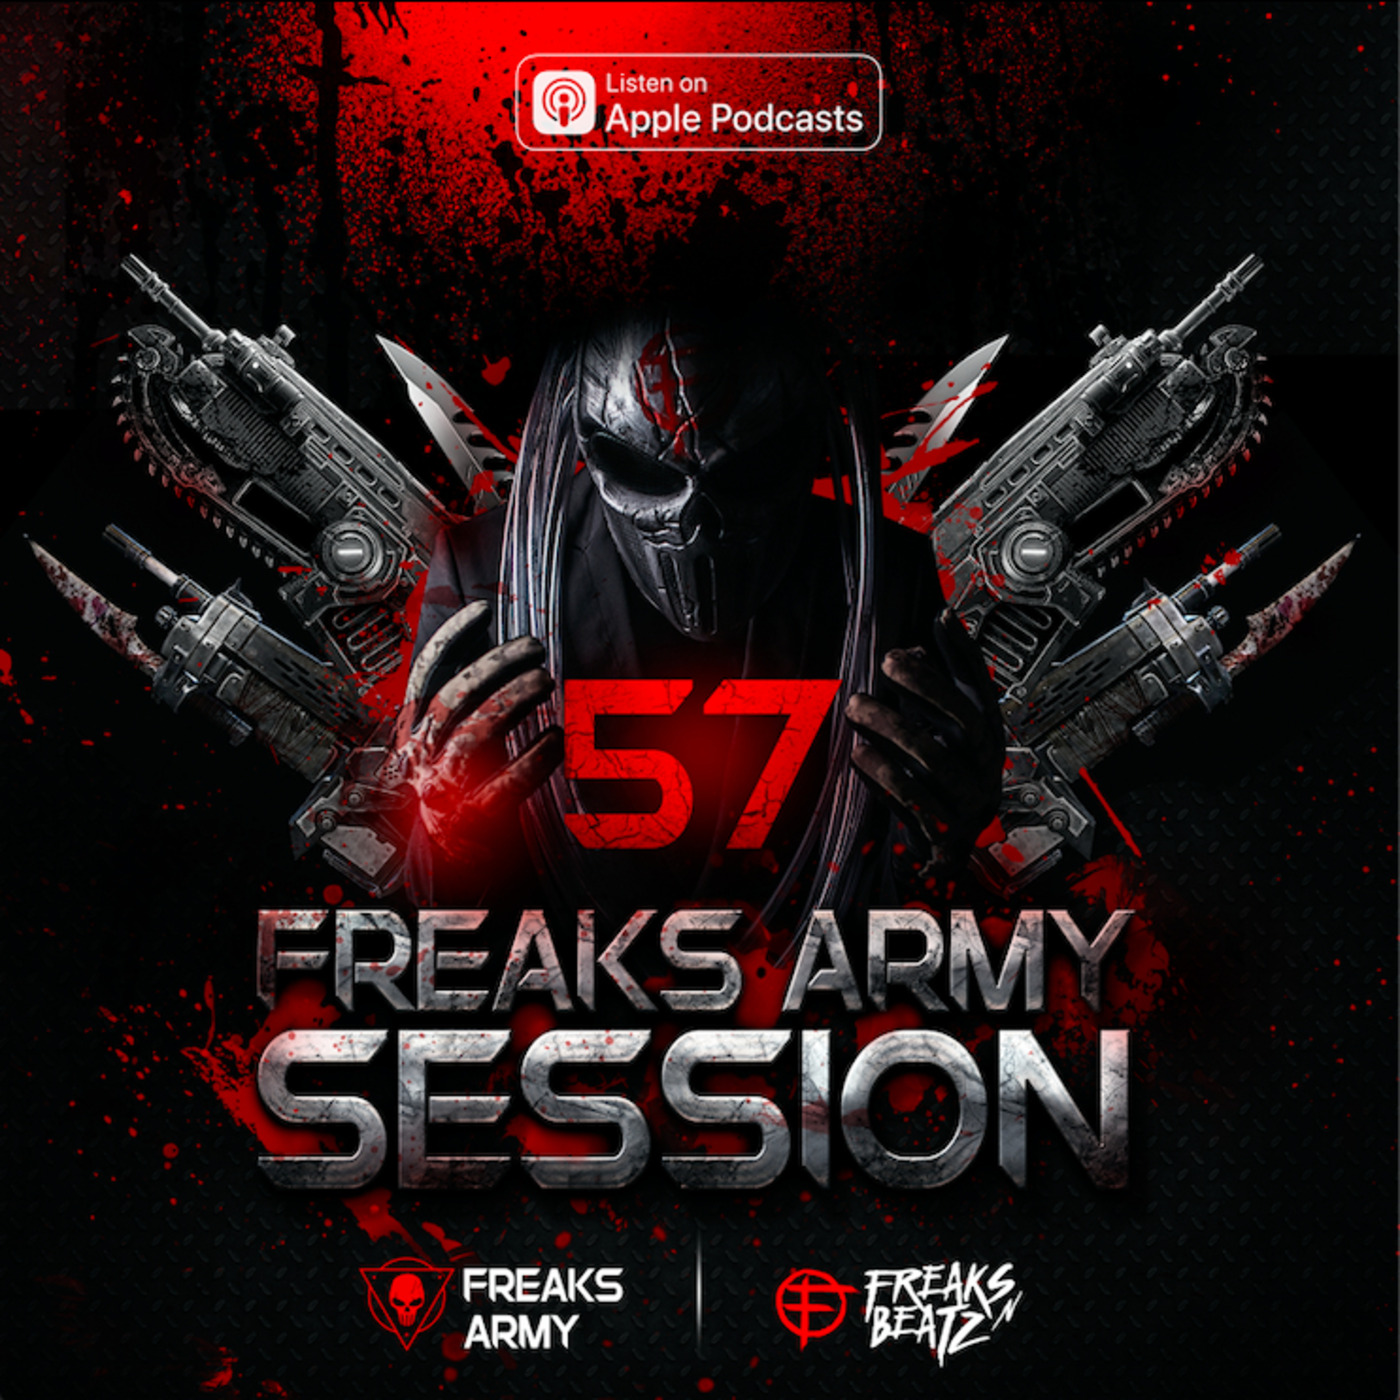 Freaks Army Session #57